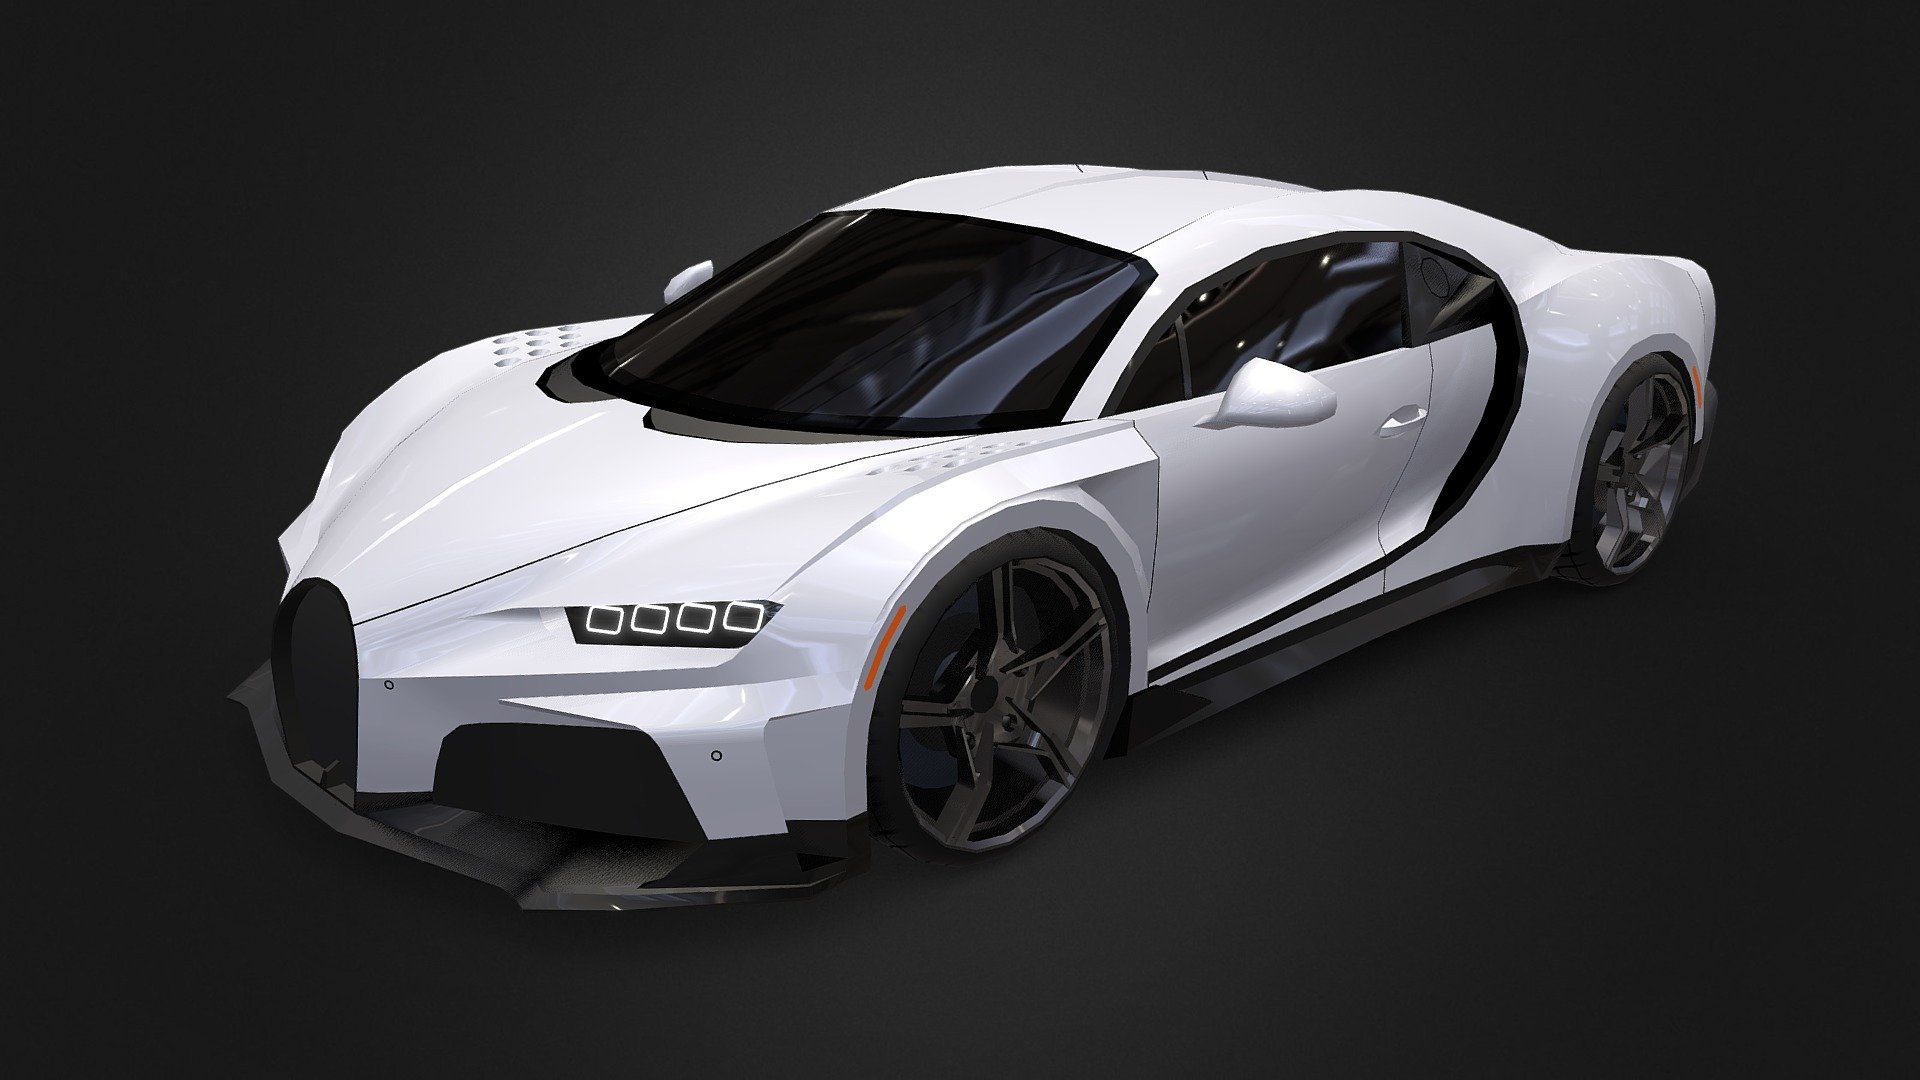 Low-poly 3d model of Bugatti Chiron Super Sport created in Blender 3.6

Polygons: 8,264  /  Vertices: 9,436  /  Triangles: 17,422

Included 3D formats:  OBJ / FBX / GLTF-GLB / BLEND - Bugatti Chiron Super Sport (low-poly) - Buy Royalty Free 3D model by Rossty (@rossty3d) 3d model